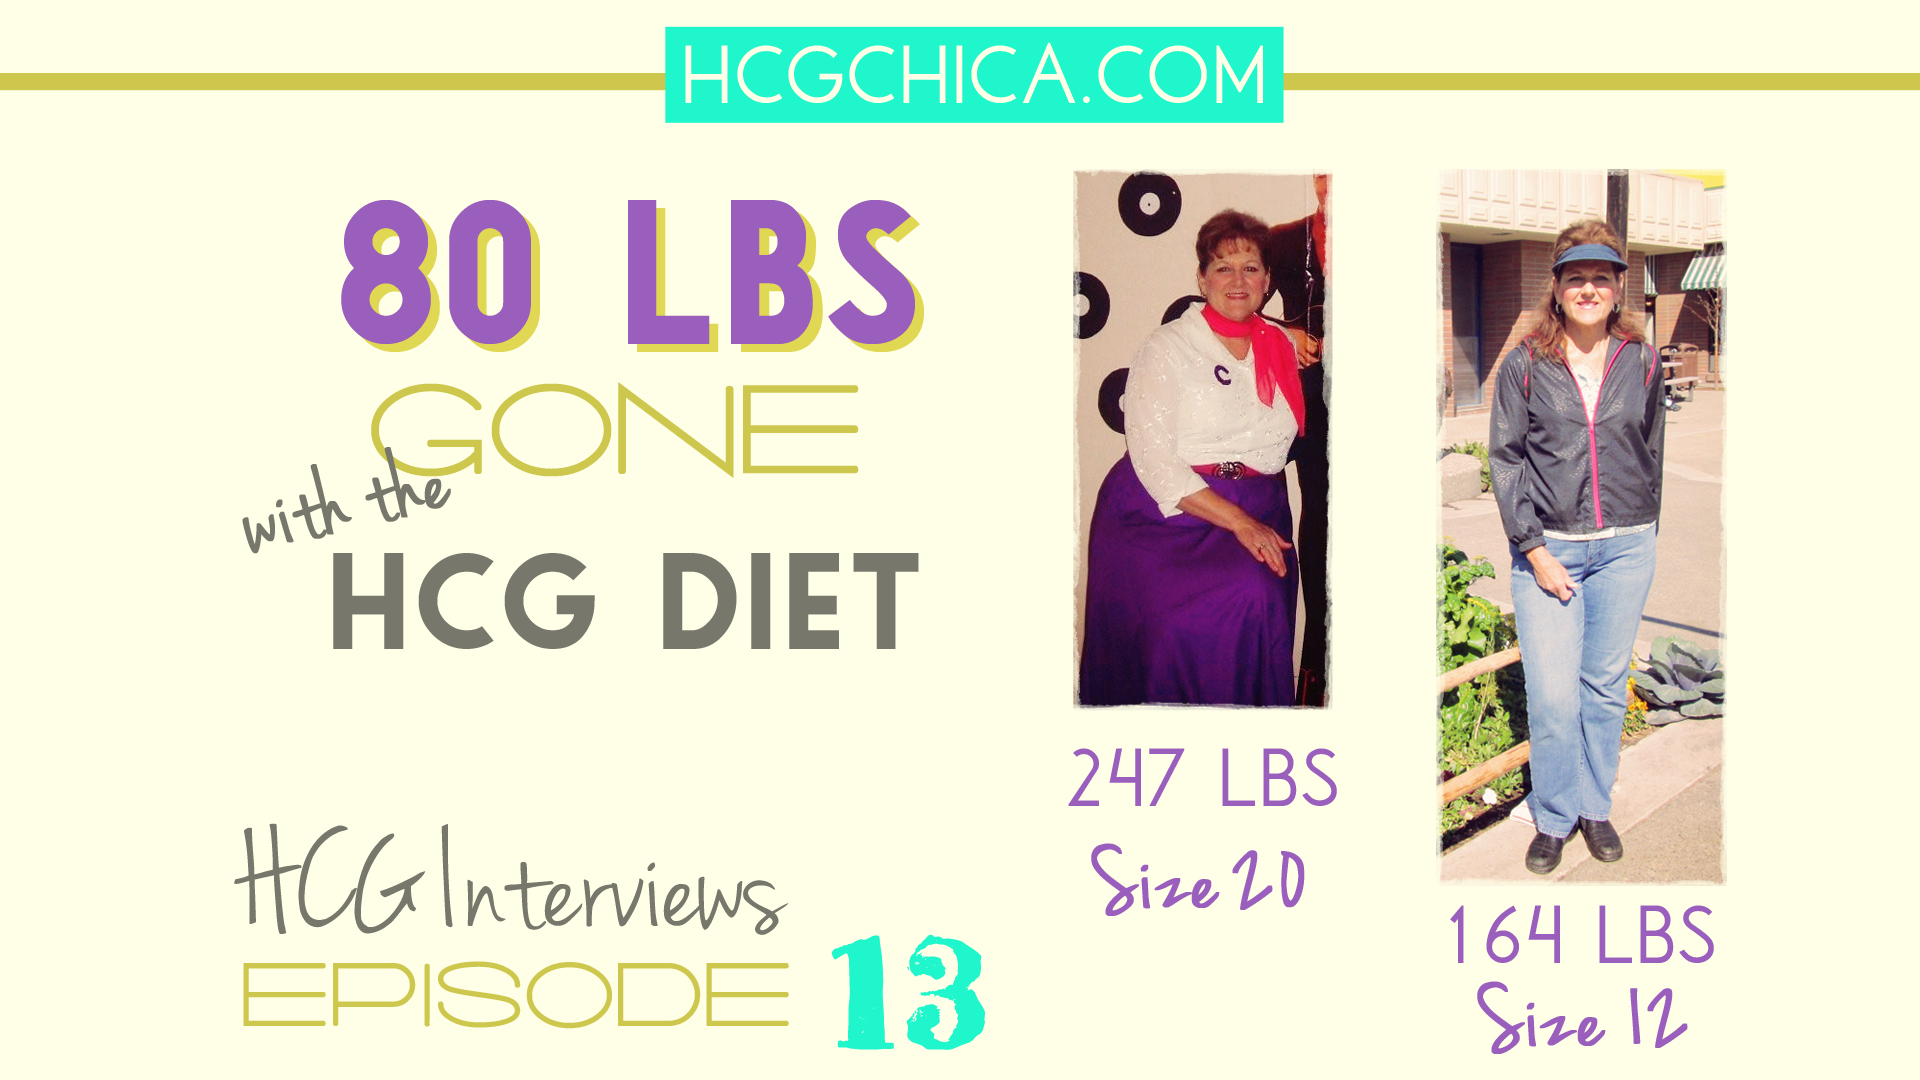 HCG Diet - Before and After Weight Loss Results Interviews - Episode 13 - hcgchica.com